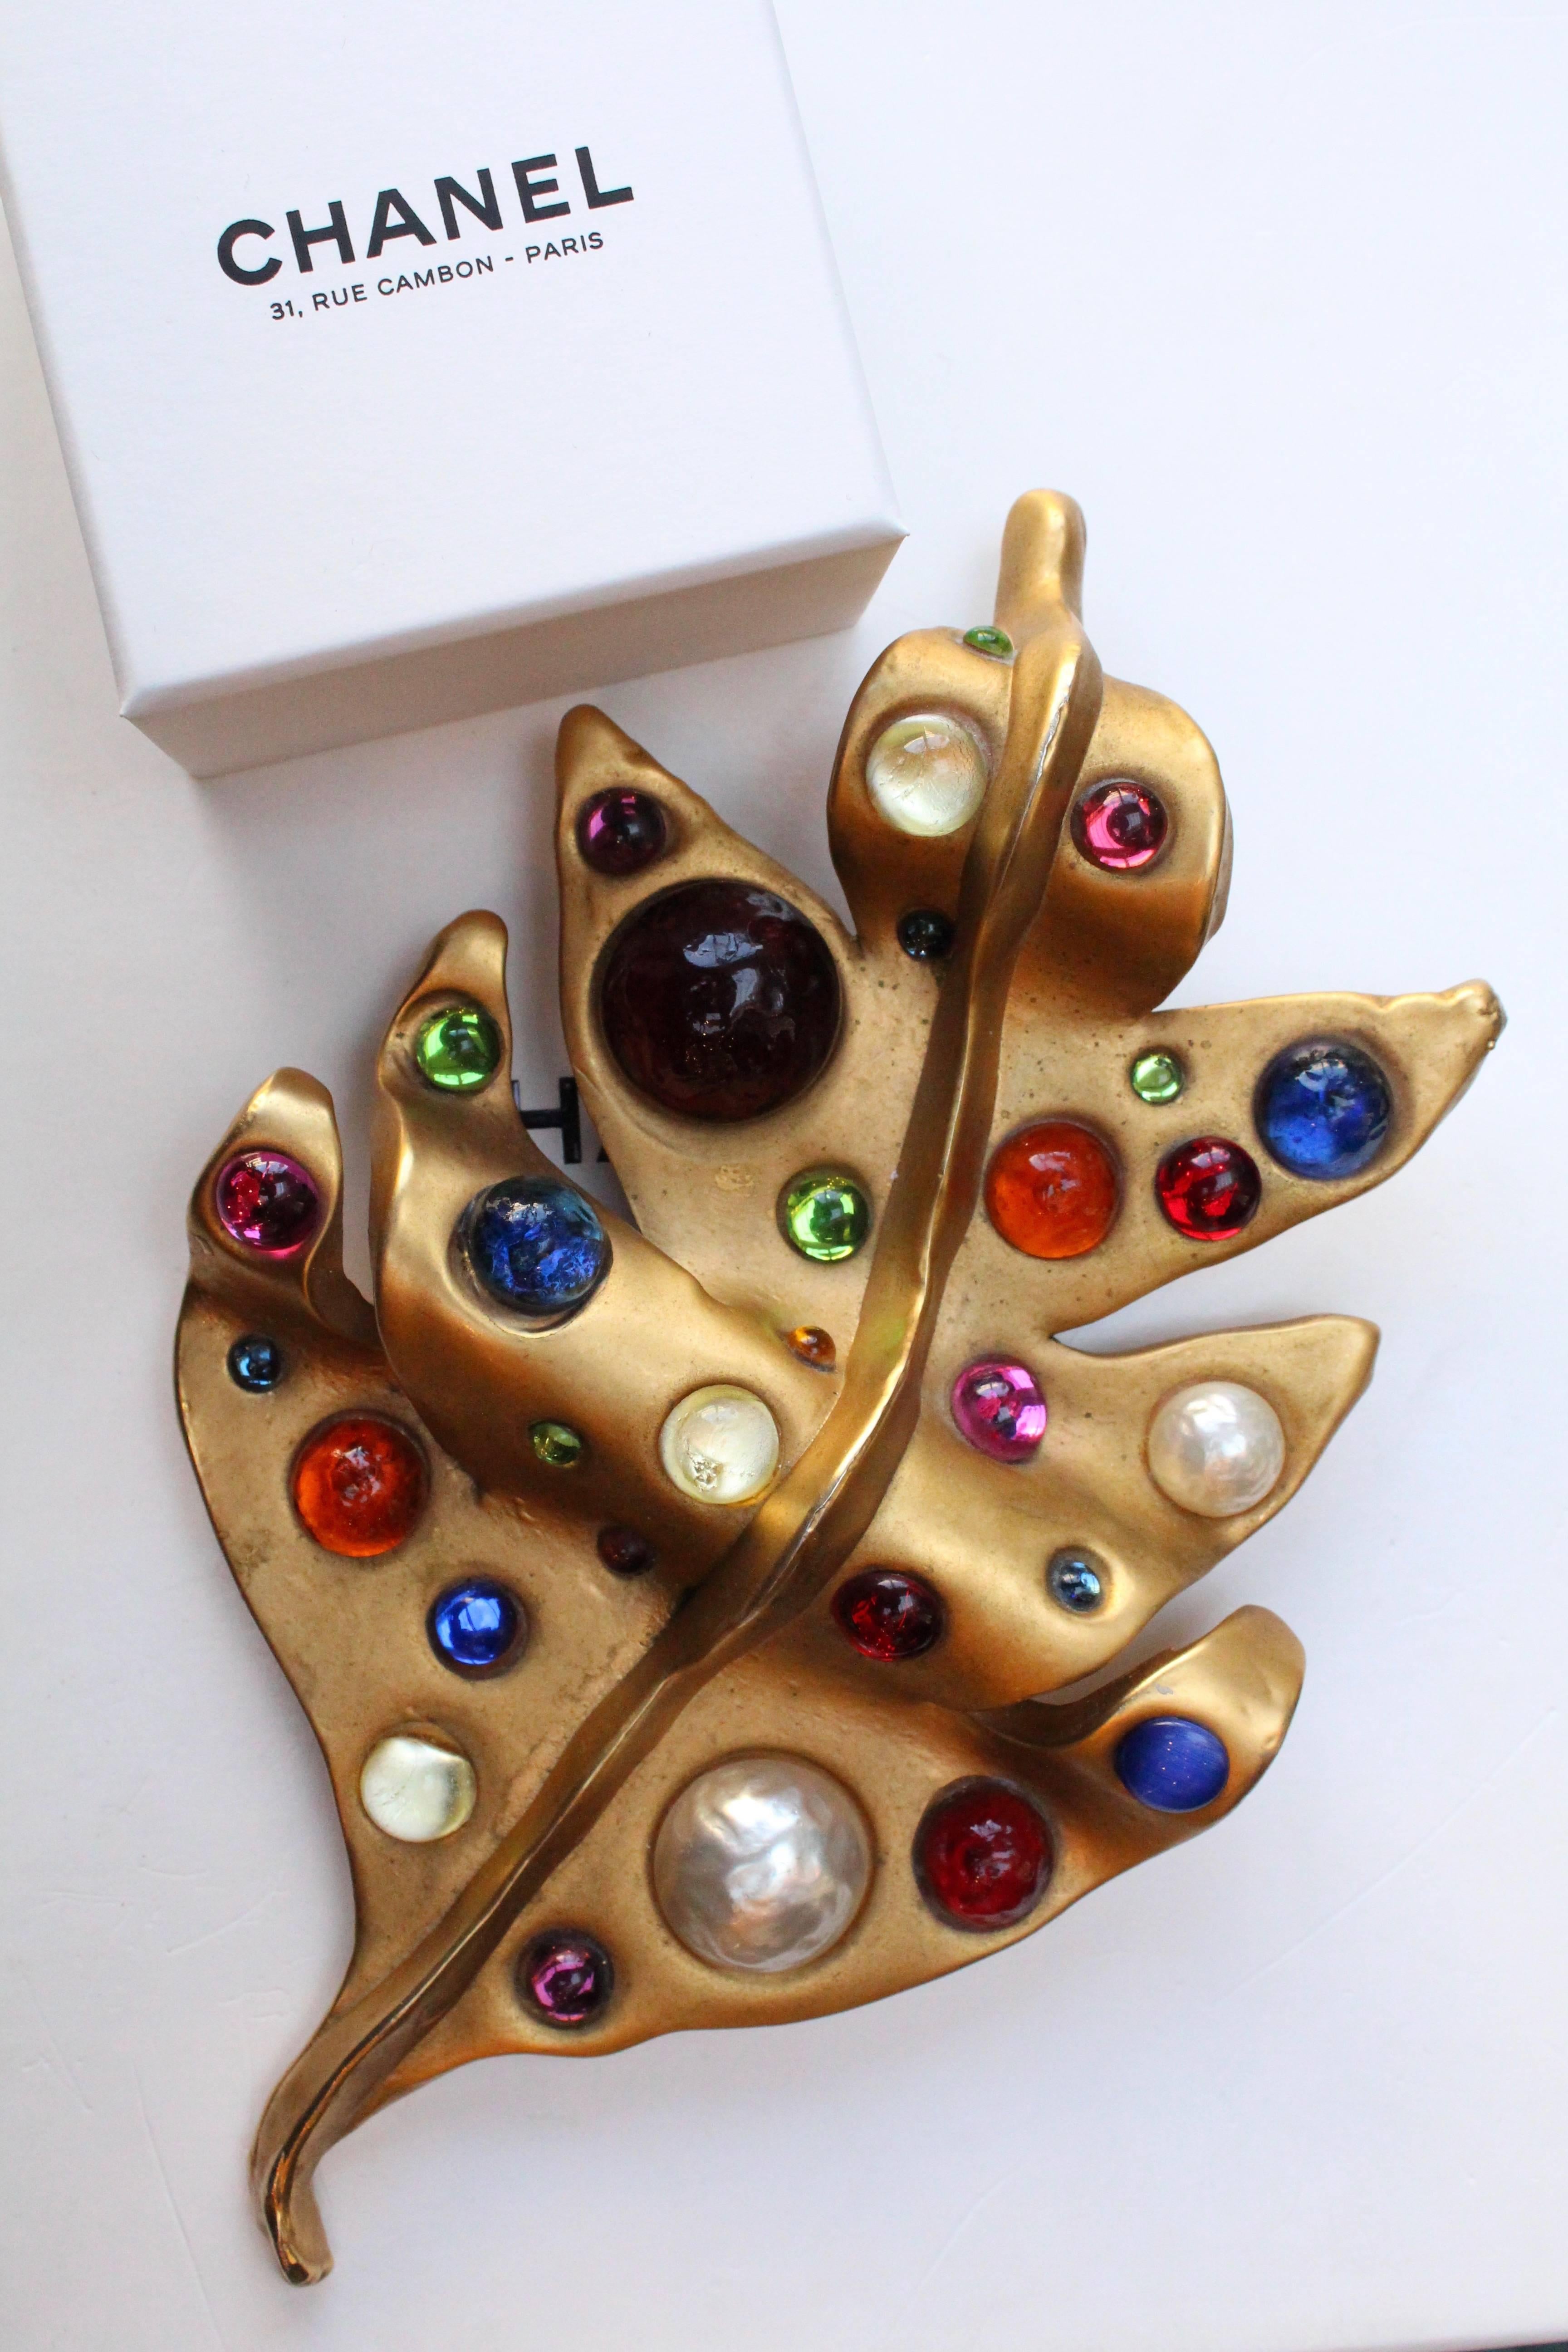 CHANEL (Made in France) Rare one-of-a-kind gilded metal brooch representing an undulating leaf. It is decorated with multiple round glass paste cabochons in sapphire, ruby, amber, emerald, amethyst, pink colors and translucent and pearly cabochons.